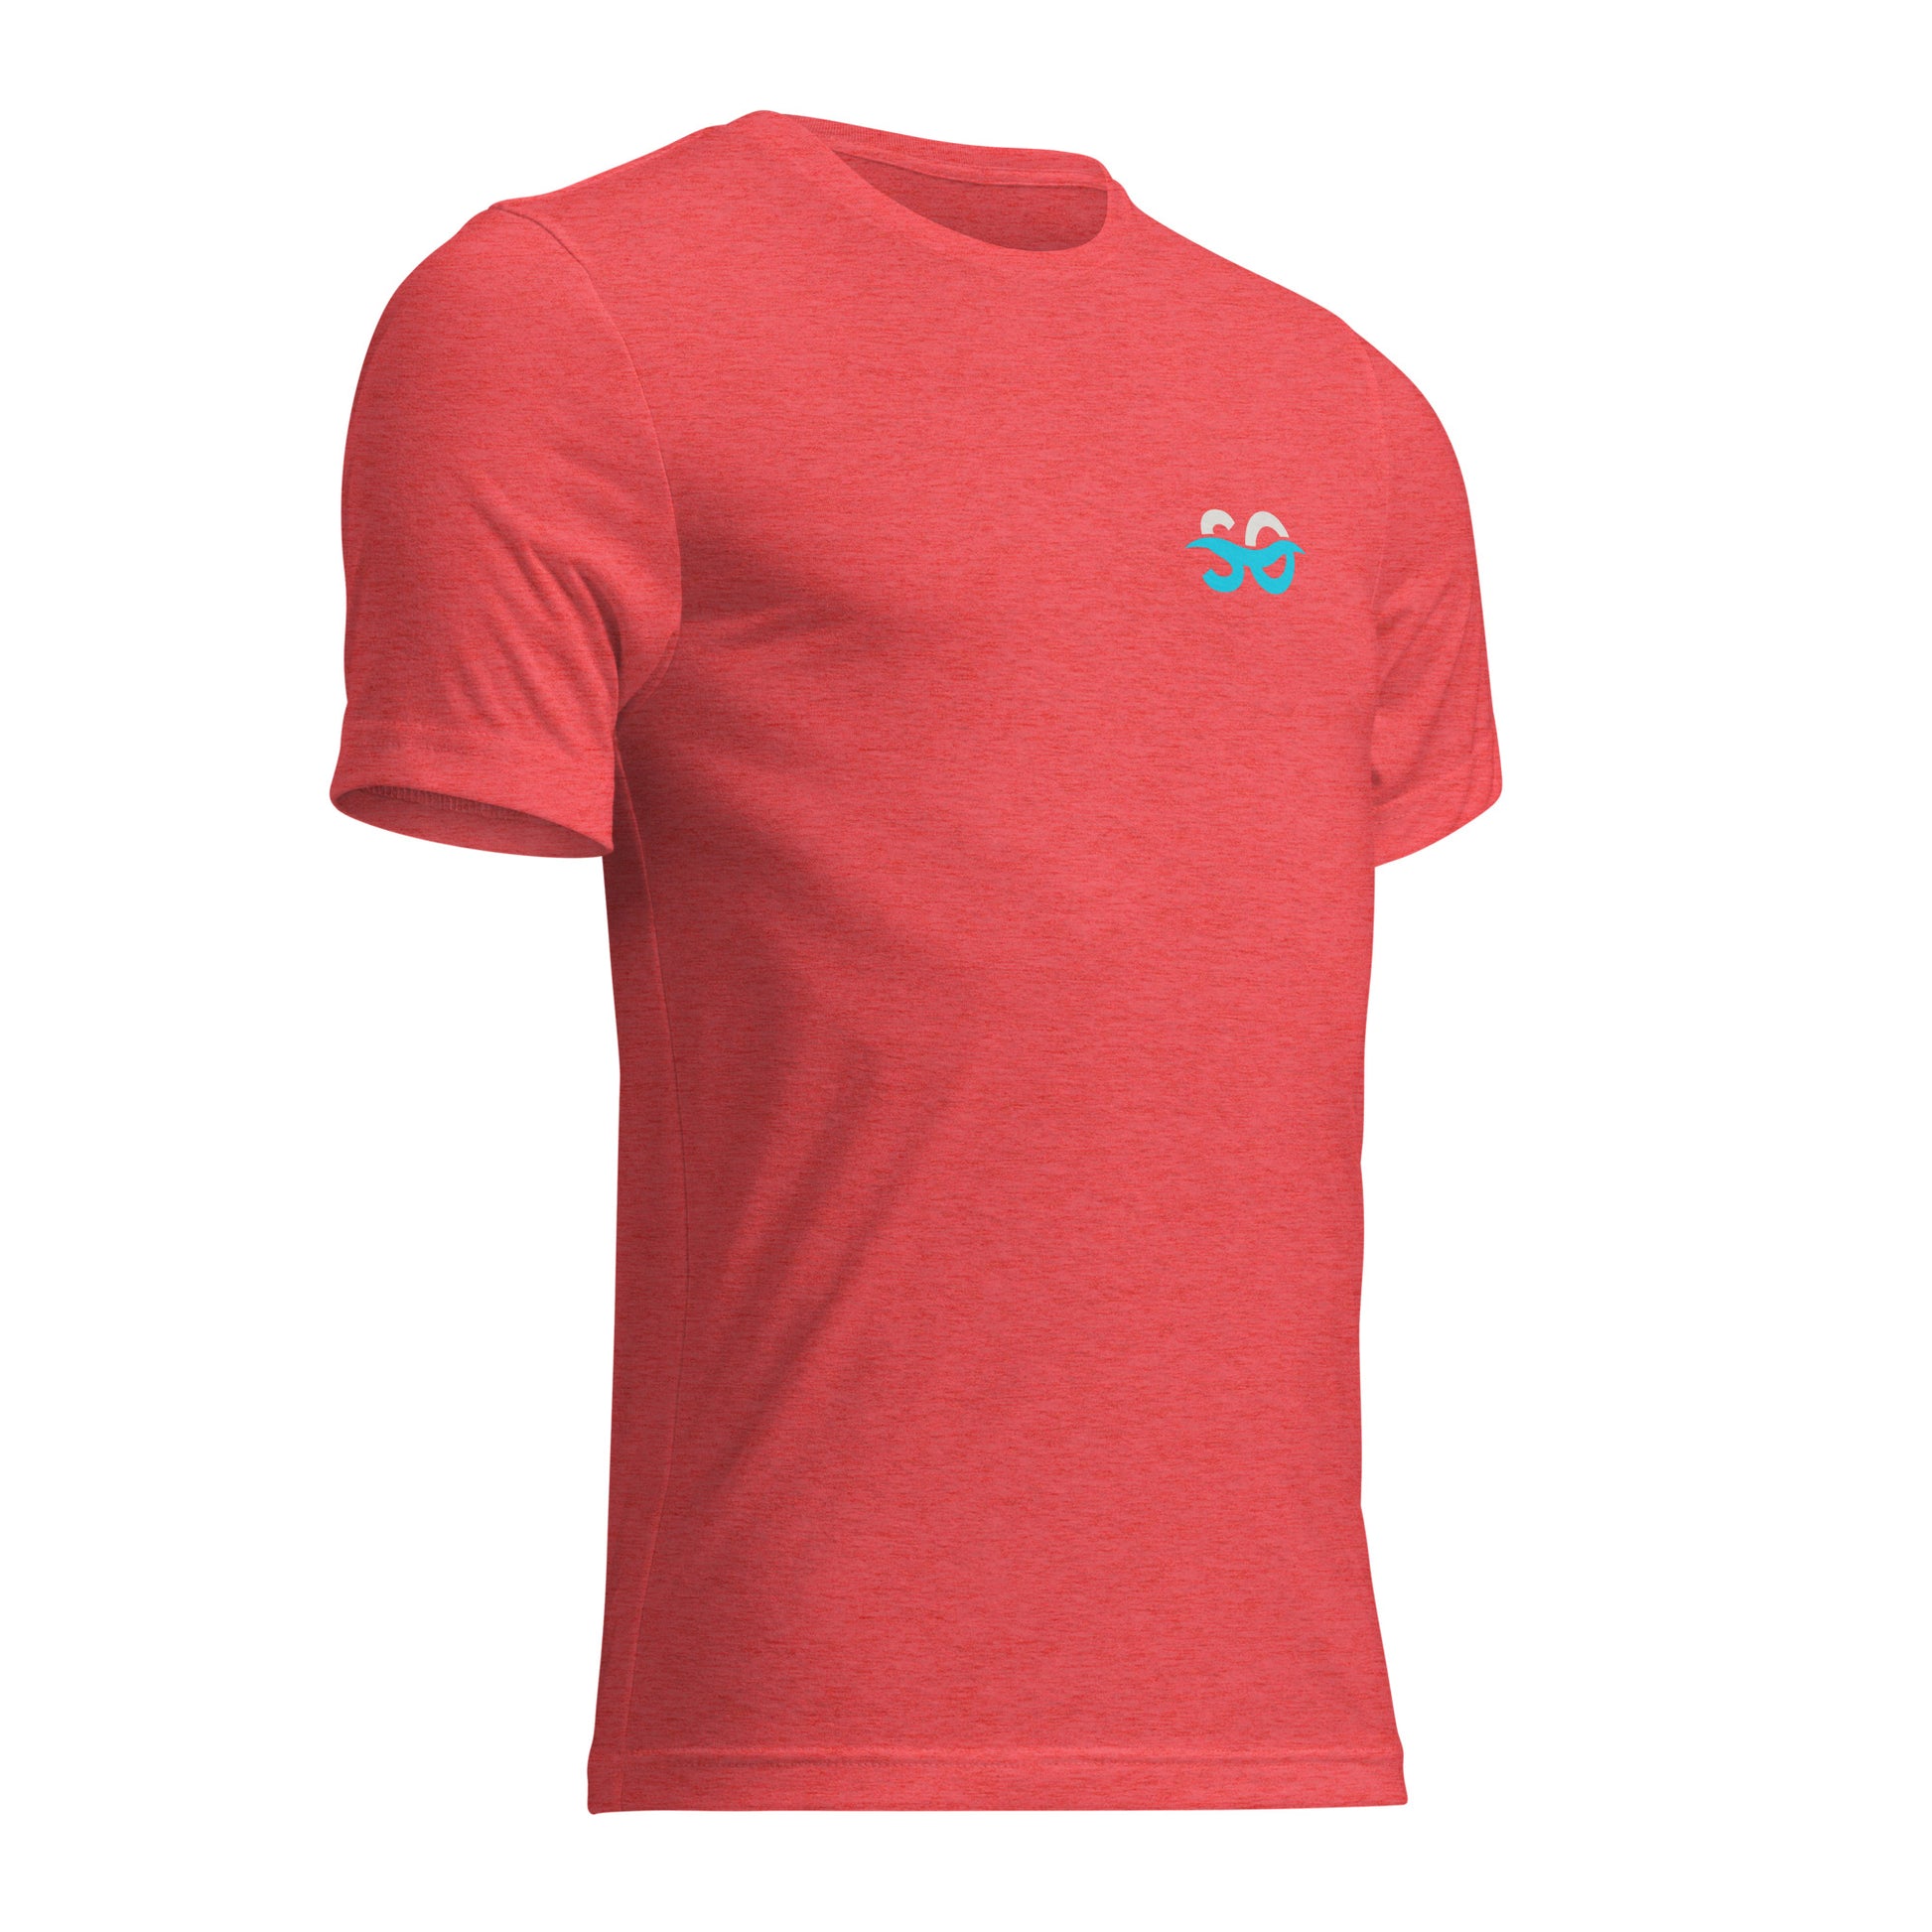 a red t - shirt with a blue logo on the chest